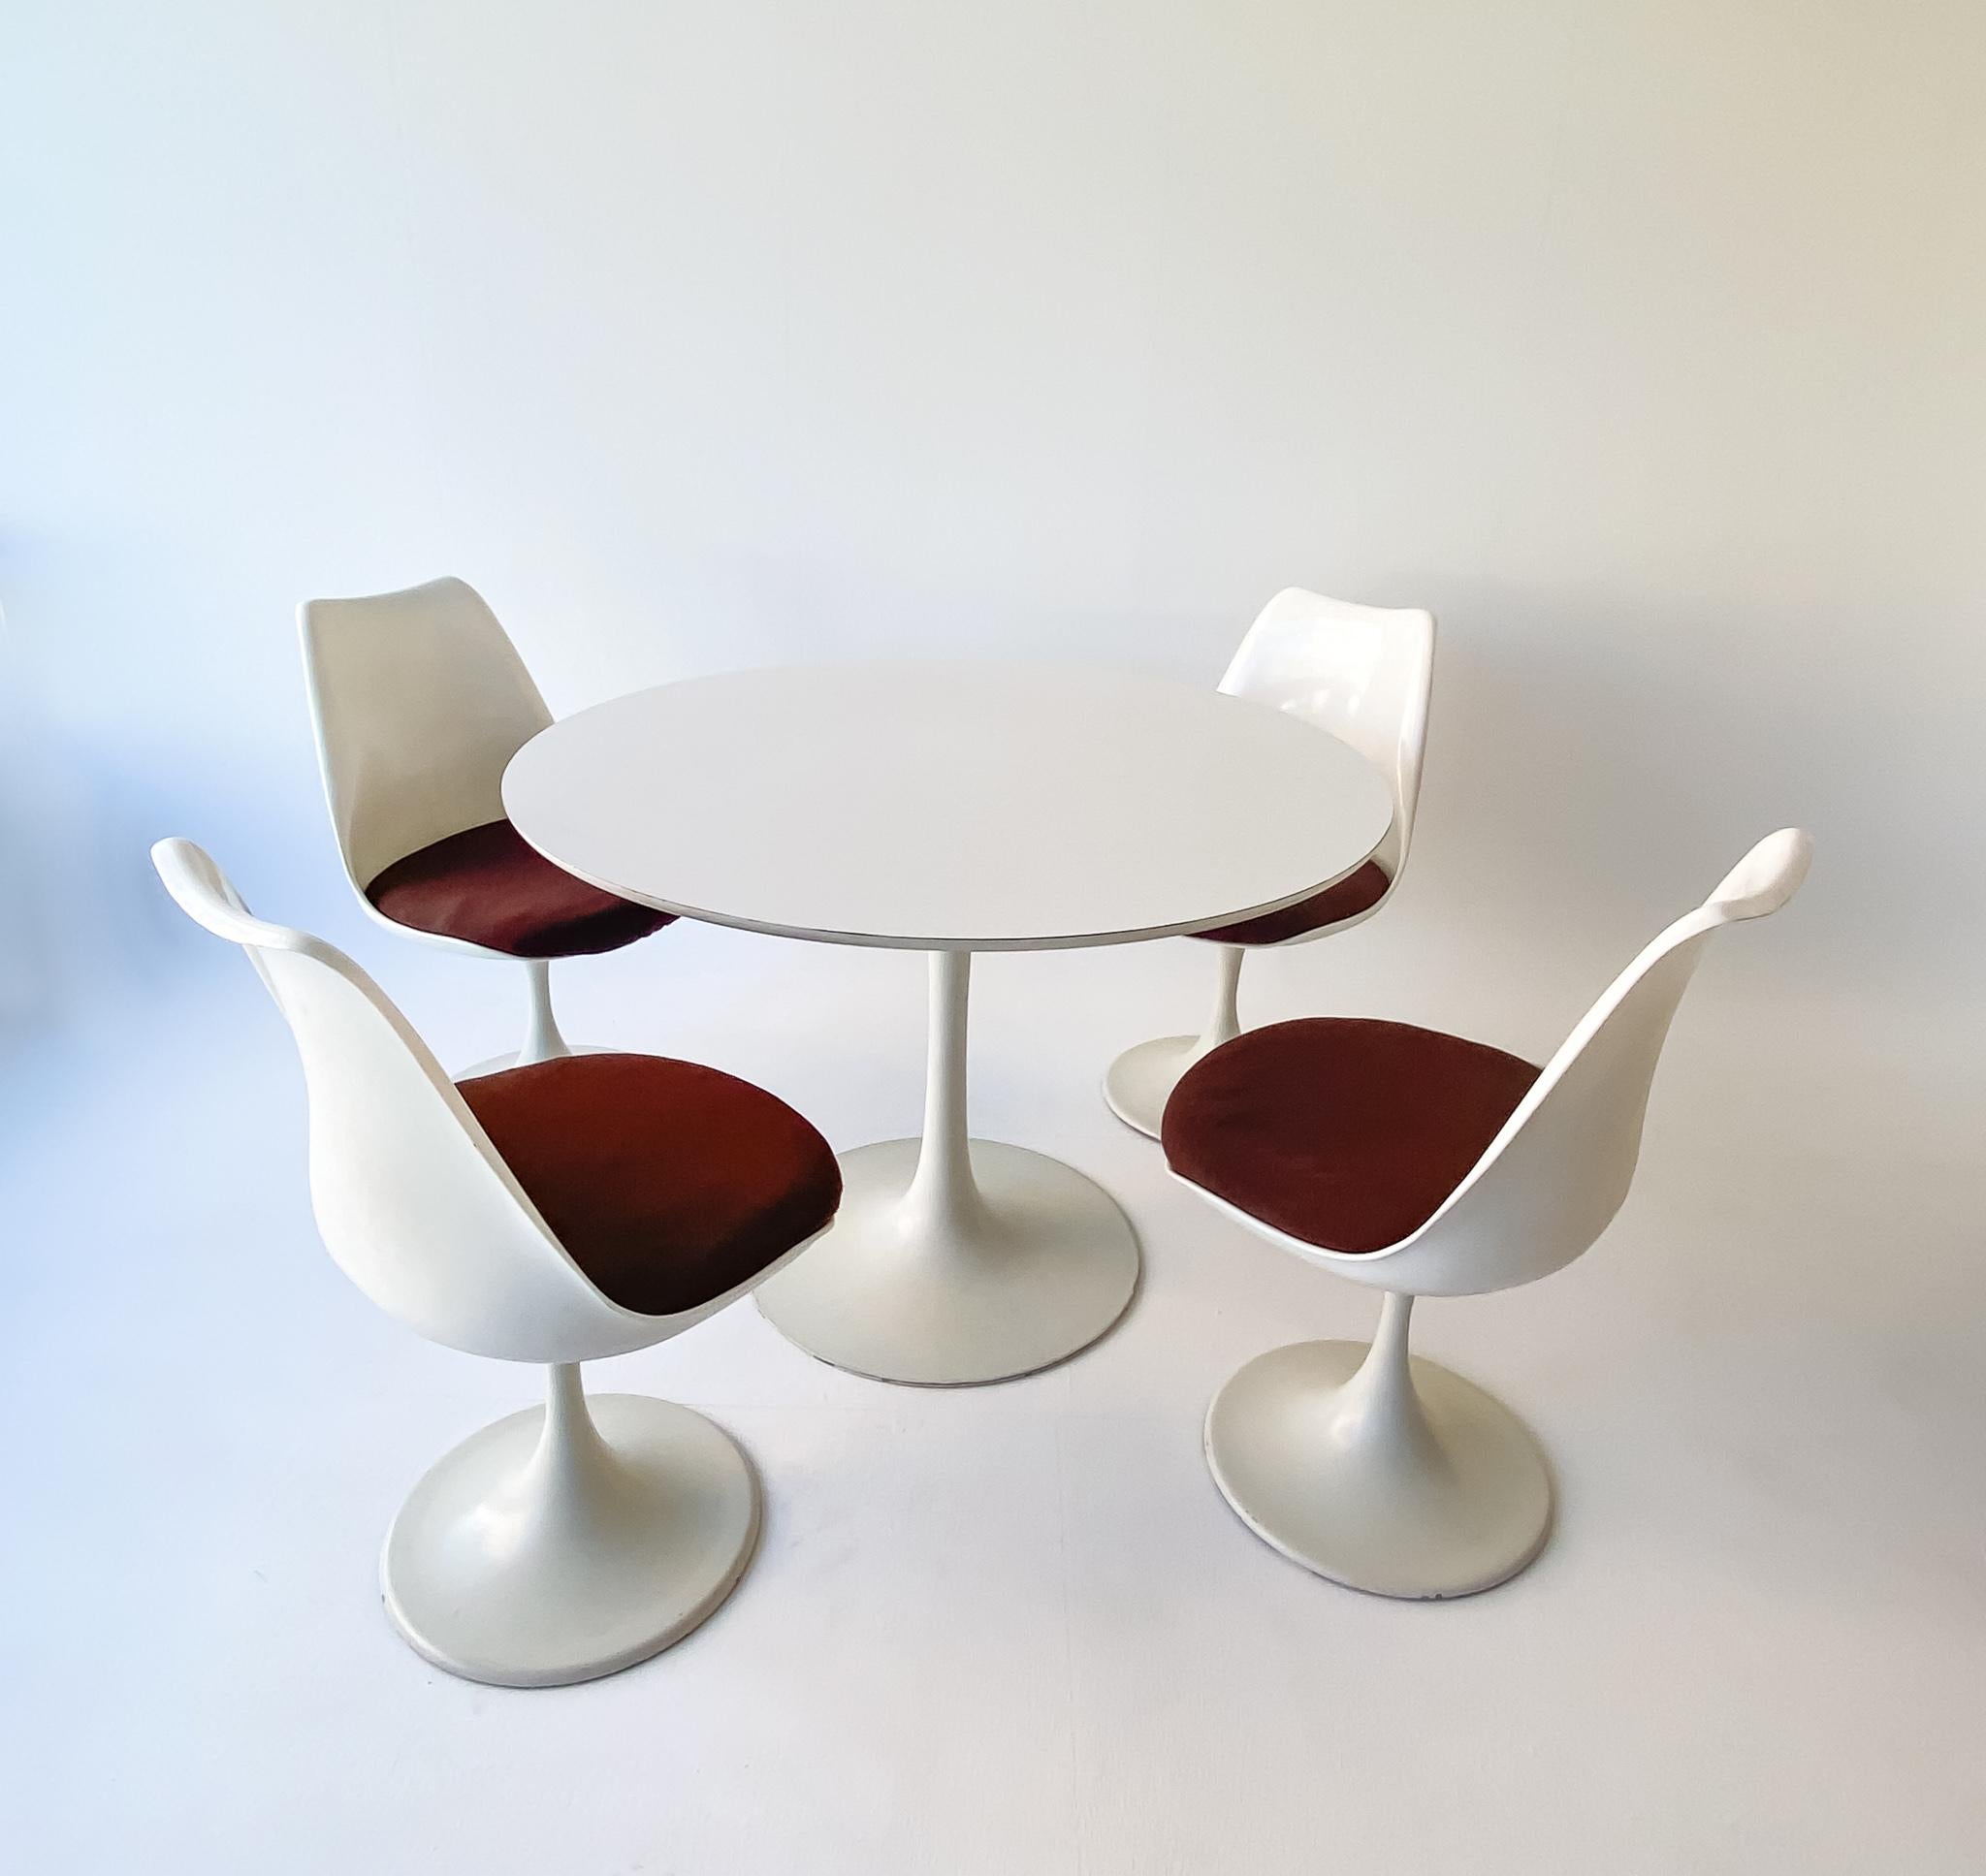 Mid-Century Modern space age set of tulip table and four tulip chairs, 1970s

This is a rare set from the 1970s consisting of a tulip table with a formica top designed by Maurice Burke for Arkana and four tulip dining chairs made in Germany by